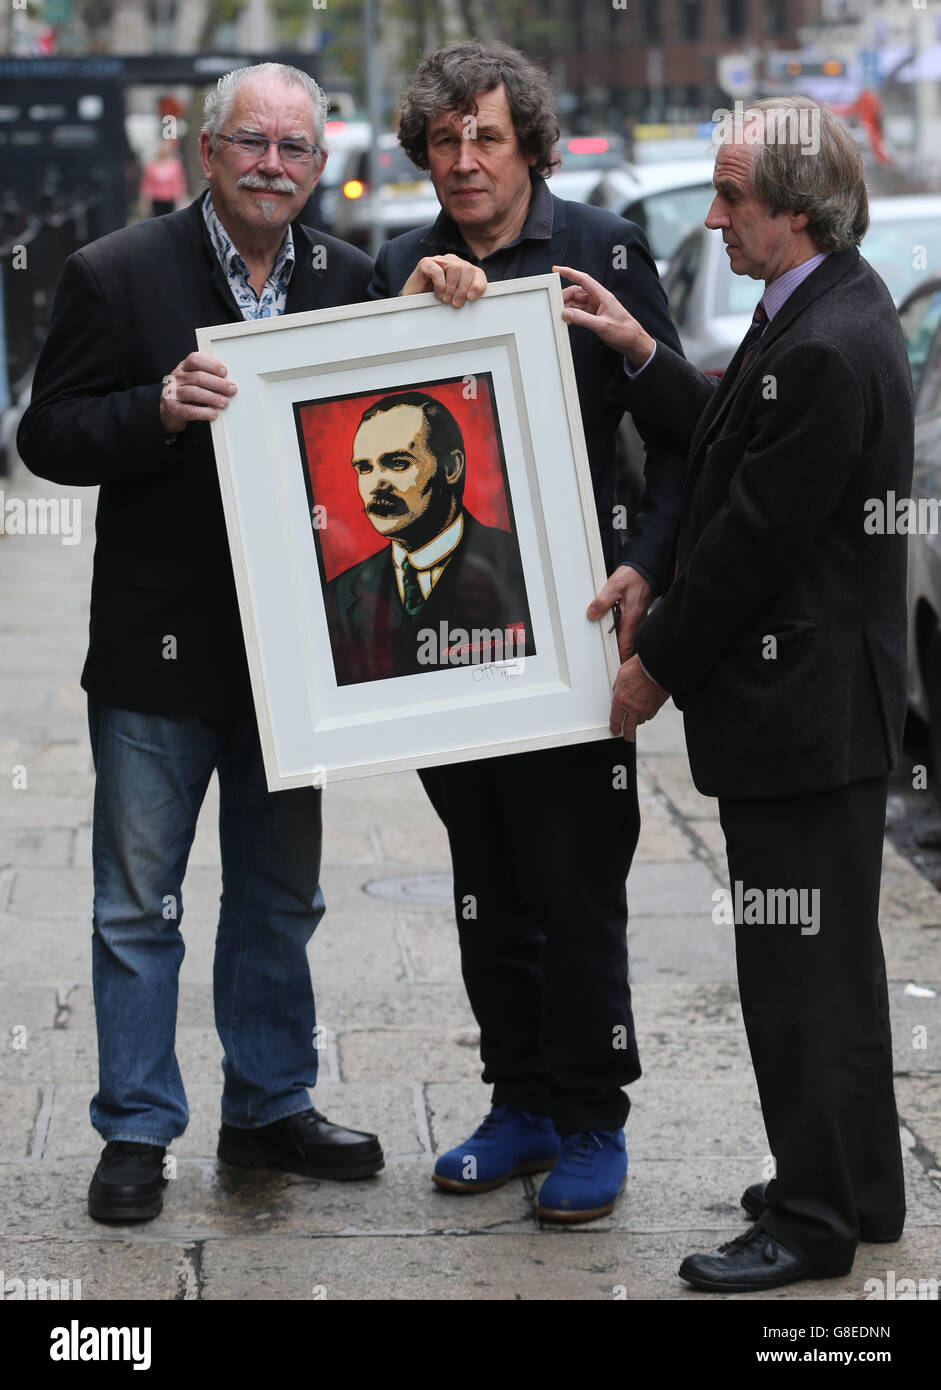 Artist Robert Ballagh (left) presents one of Ireland's most celebrated actors, Stephen Rea (centre), with a limited edition print of Jim Fitzpatrick's image of James Connolly, specially created for Reclaim the Vision of 1916 event in Dublin this afternoon. Looking on is James Connolly's great-grandson James Connelly Heron (right). Stock Photo